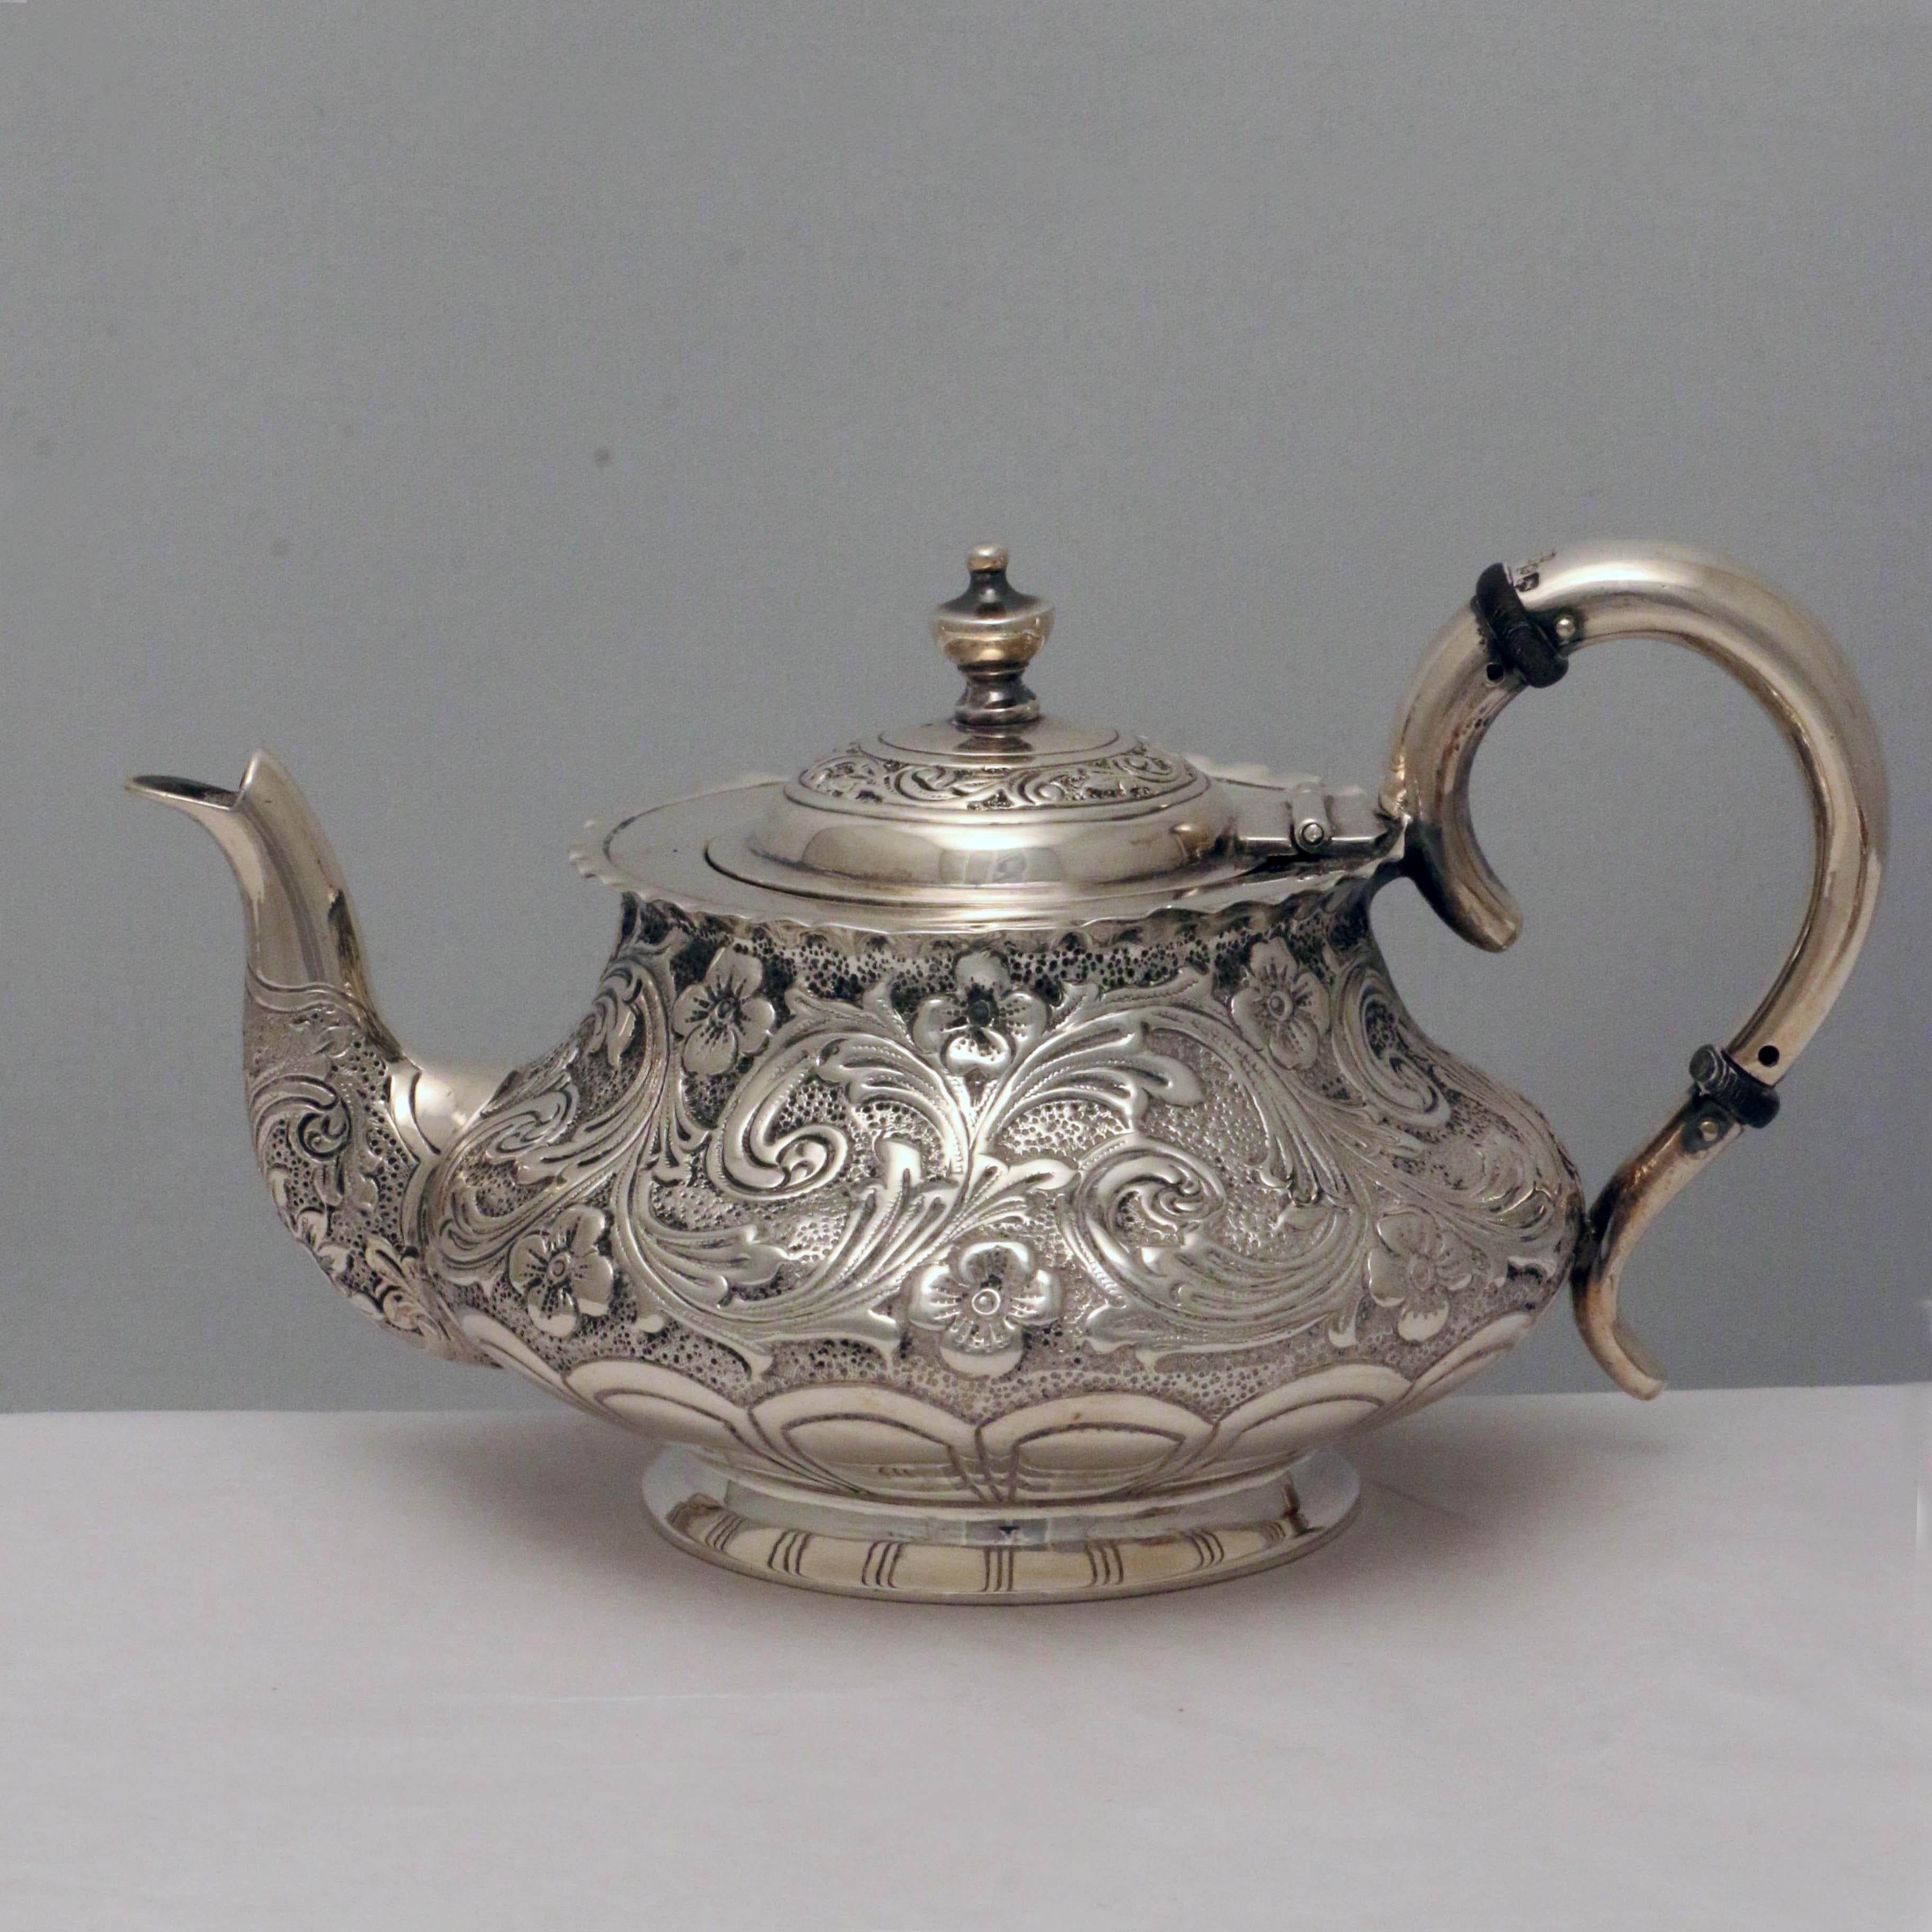 This charming set would be ideal for a single discriminating tea drinker. It comprises: the teapot, the sugar basin and matching milk jug. Though small, it has a wonderful feeling of skillful quality. Hall Marked Silver London 1887 by Wakely and